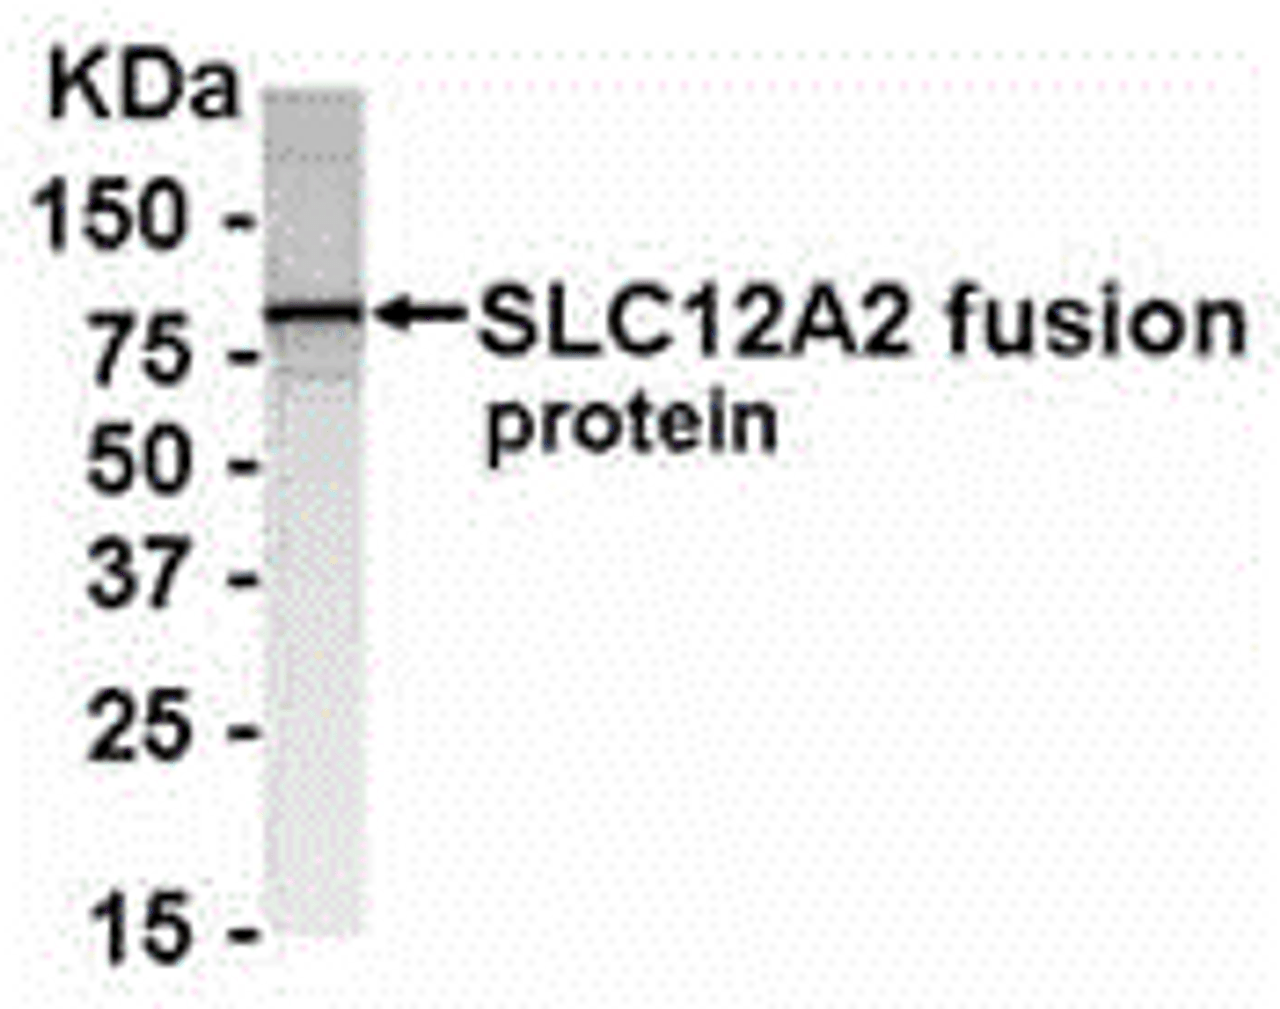 E coli-derived fusion protein as test antigen. Affinity-purified IgY dilution: 1:2000, Goat anti-IgY-HRP dilution: 1:1000. Colorimetric method for signal development.